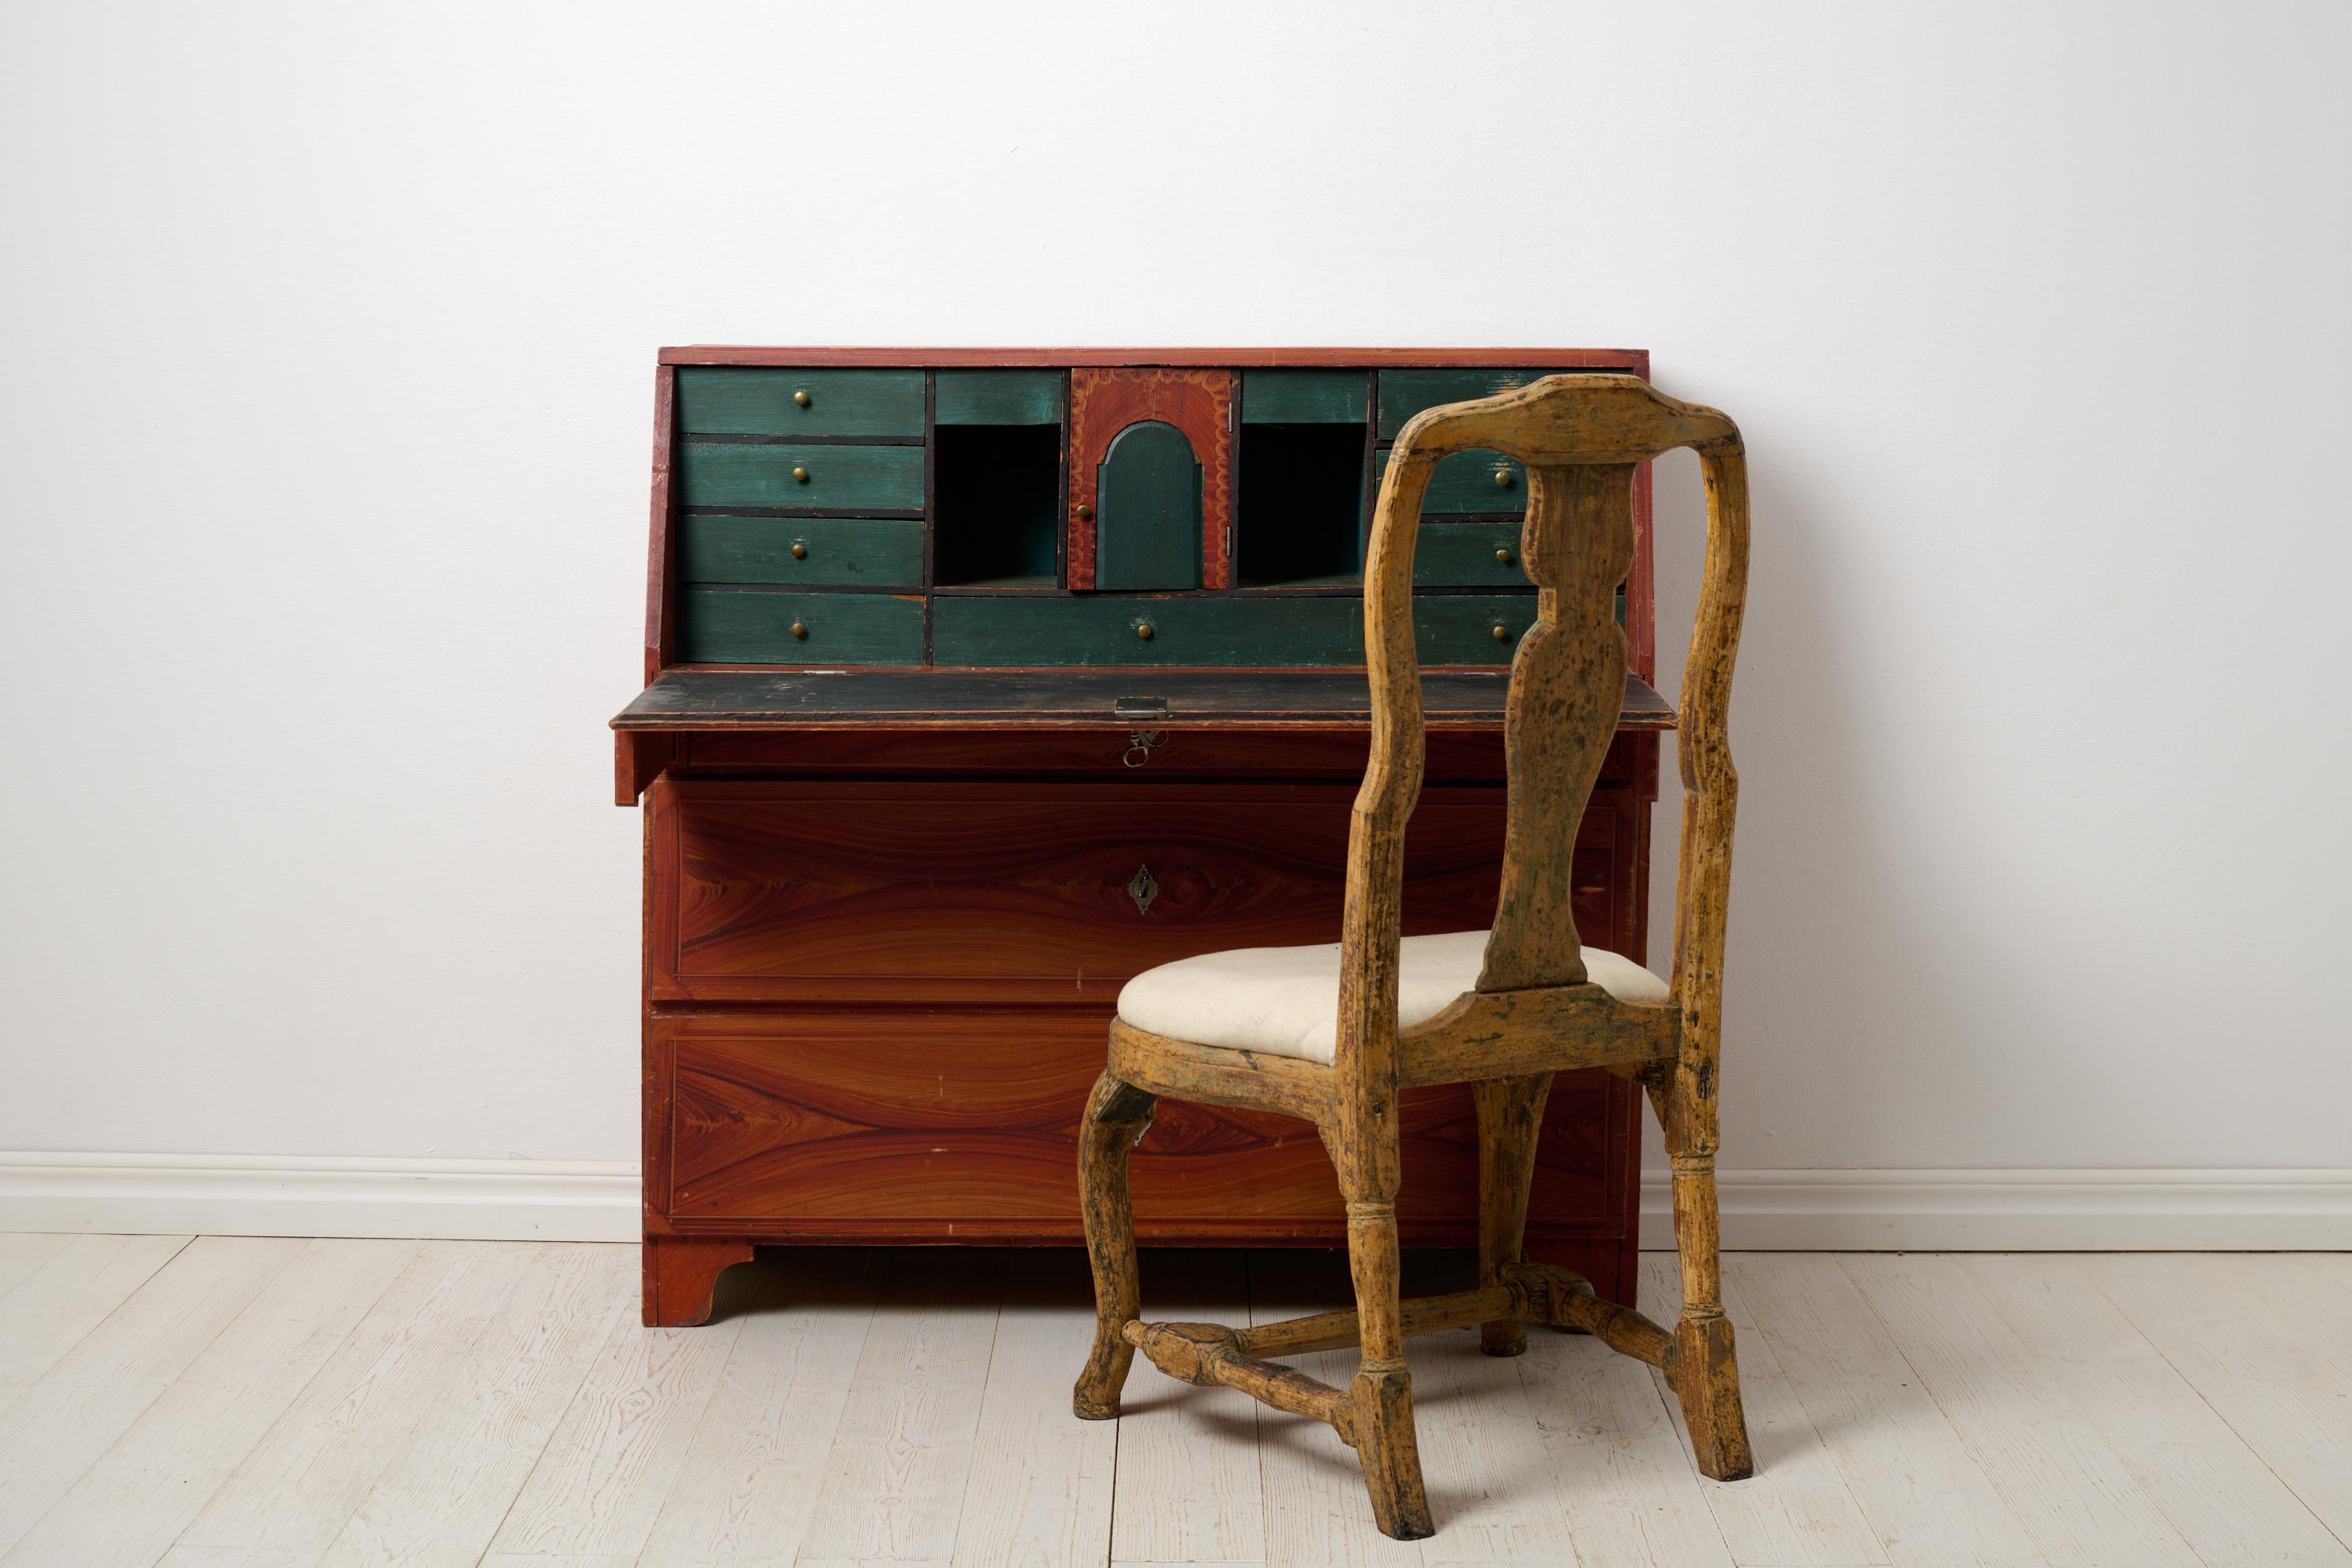 Genuine antique Swedish escritoire from the early 1800s. This escritoire, or secretary desk, is a genuine country furniture from northern Sweden made around 1820 to 1840. Made by hand in solid pine with original faux paint. The paint has some minor